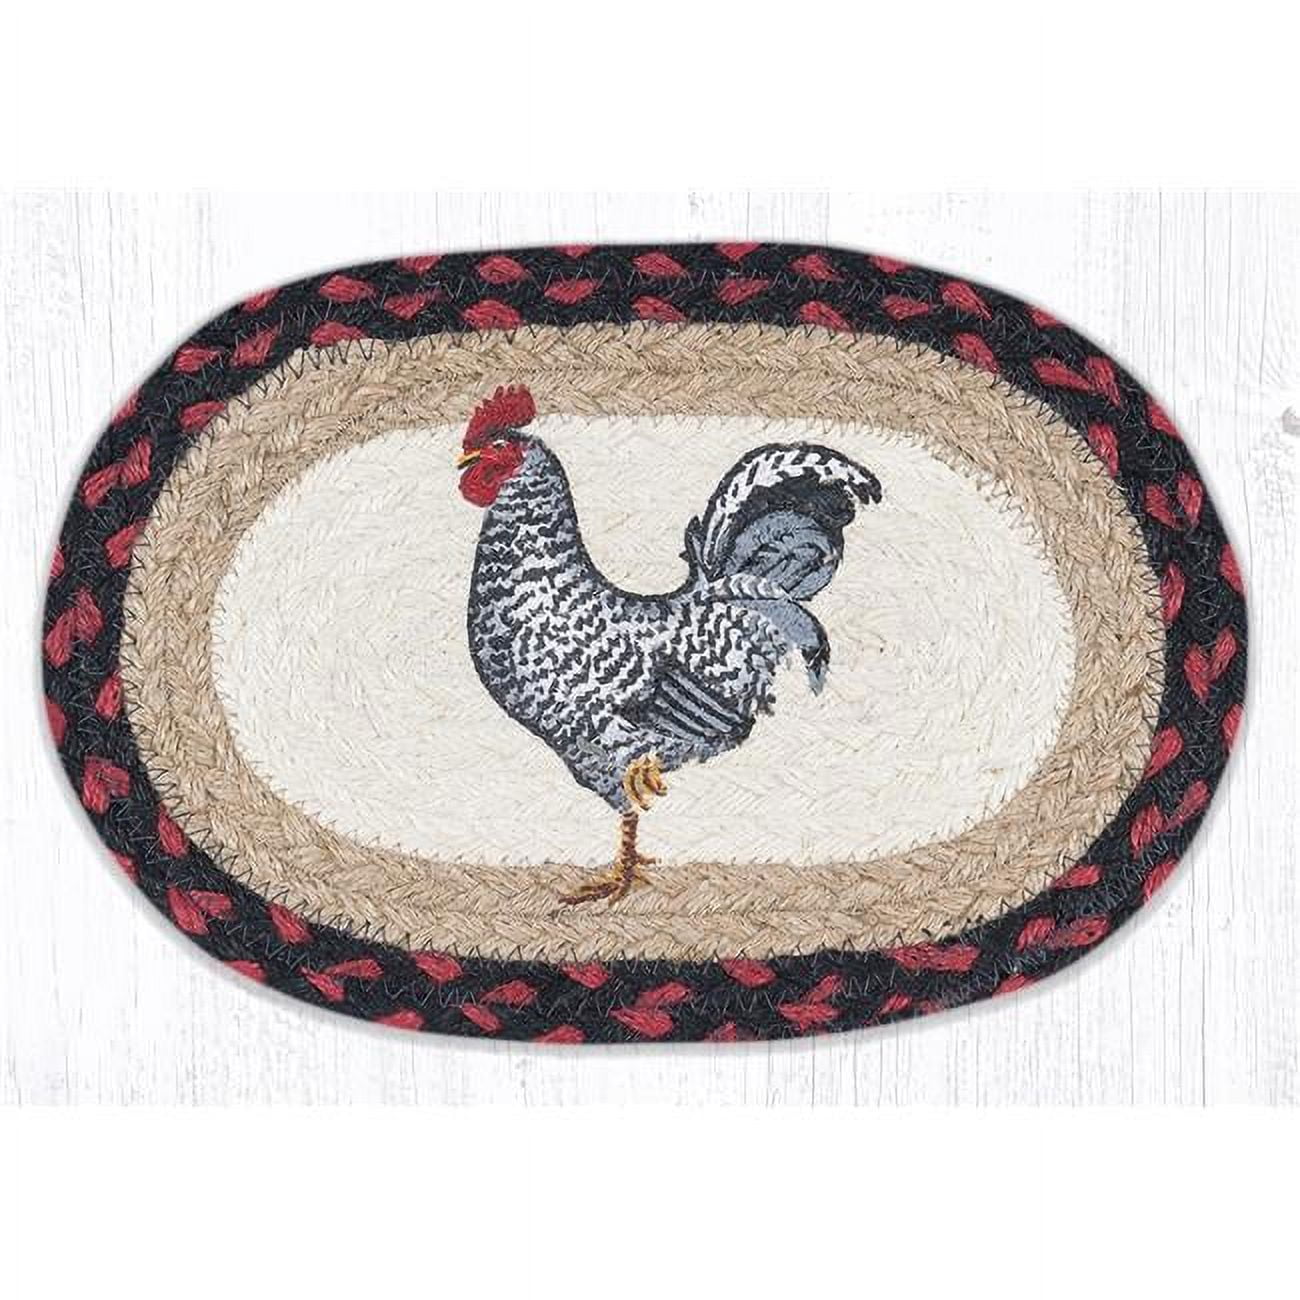 Capitol Importing 01-602bwr 7.5 X 11 In. Omsp-602 Black & White Rooster Printed Oval Swatch